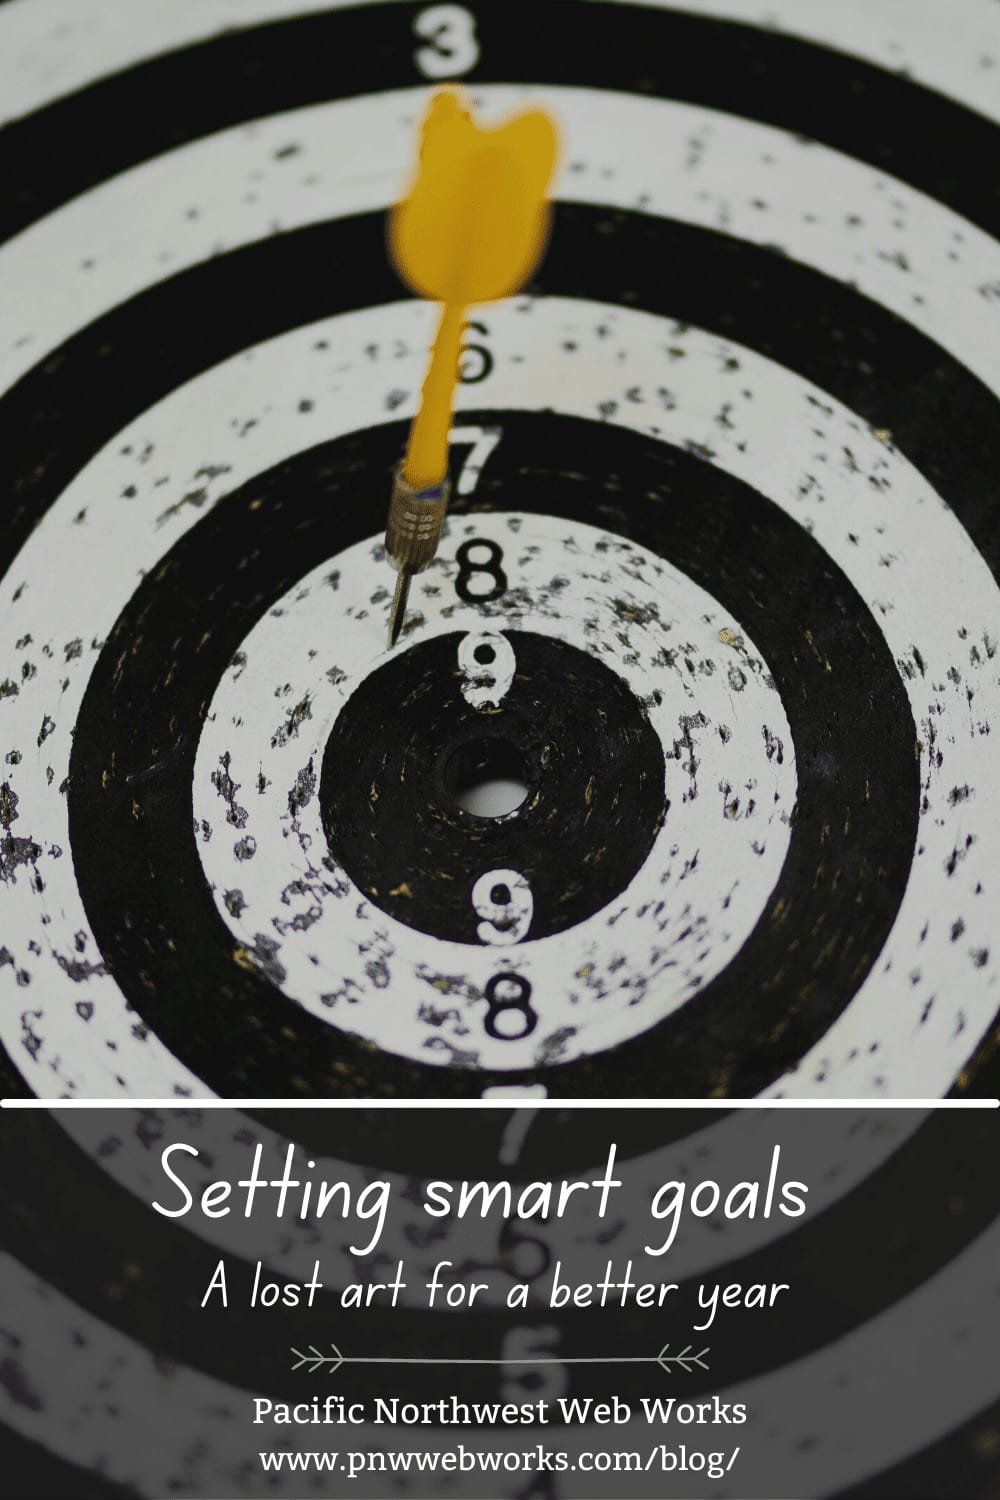 The lost art of setting smart goals for a better year